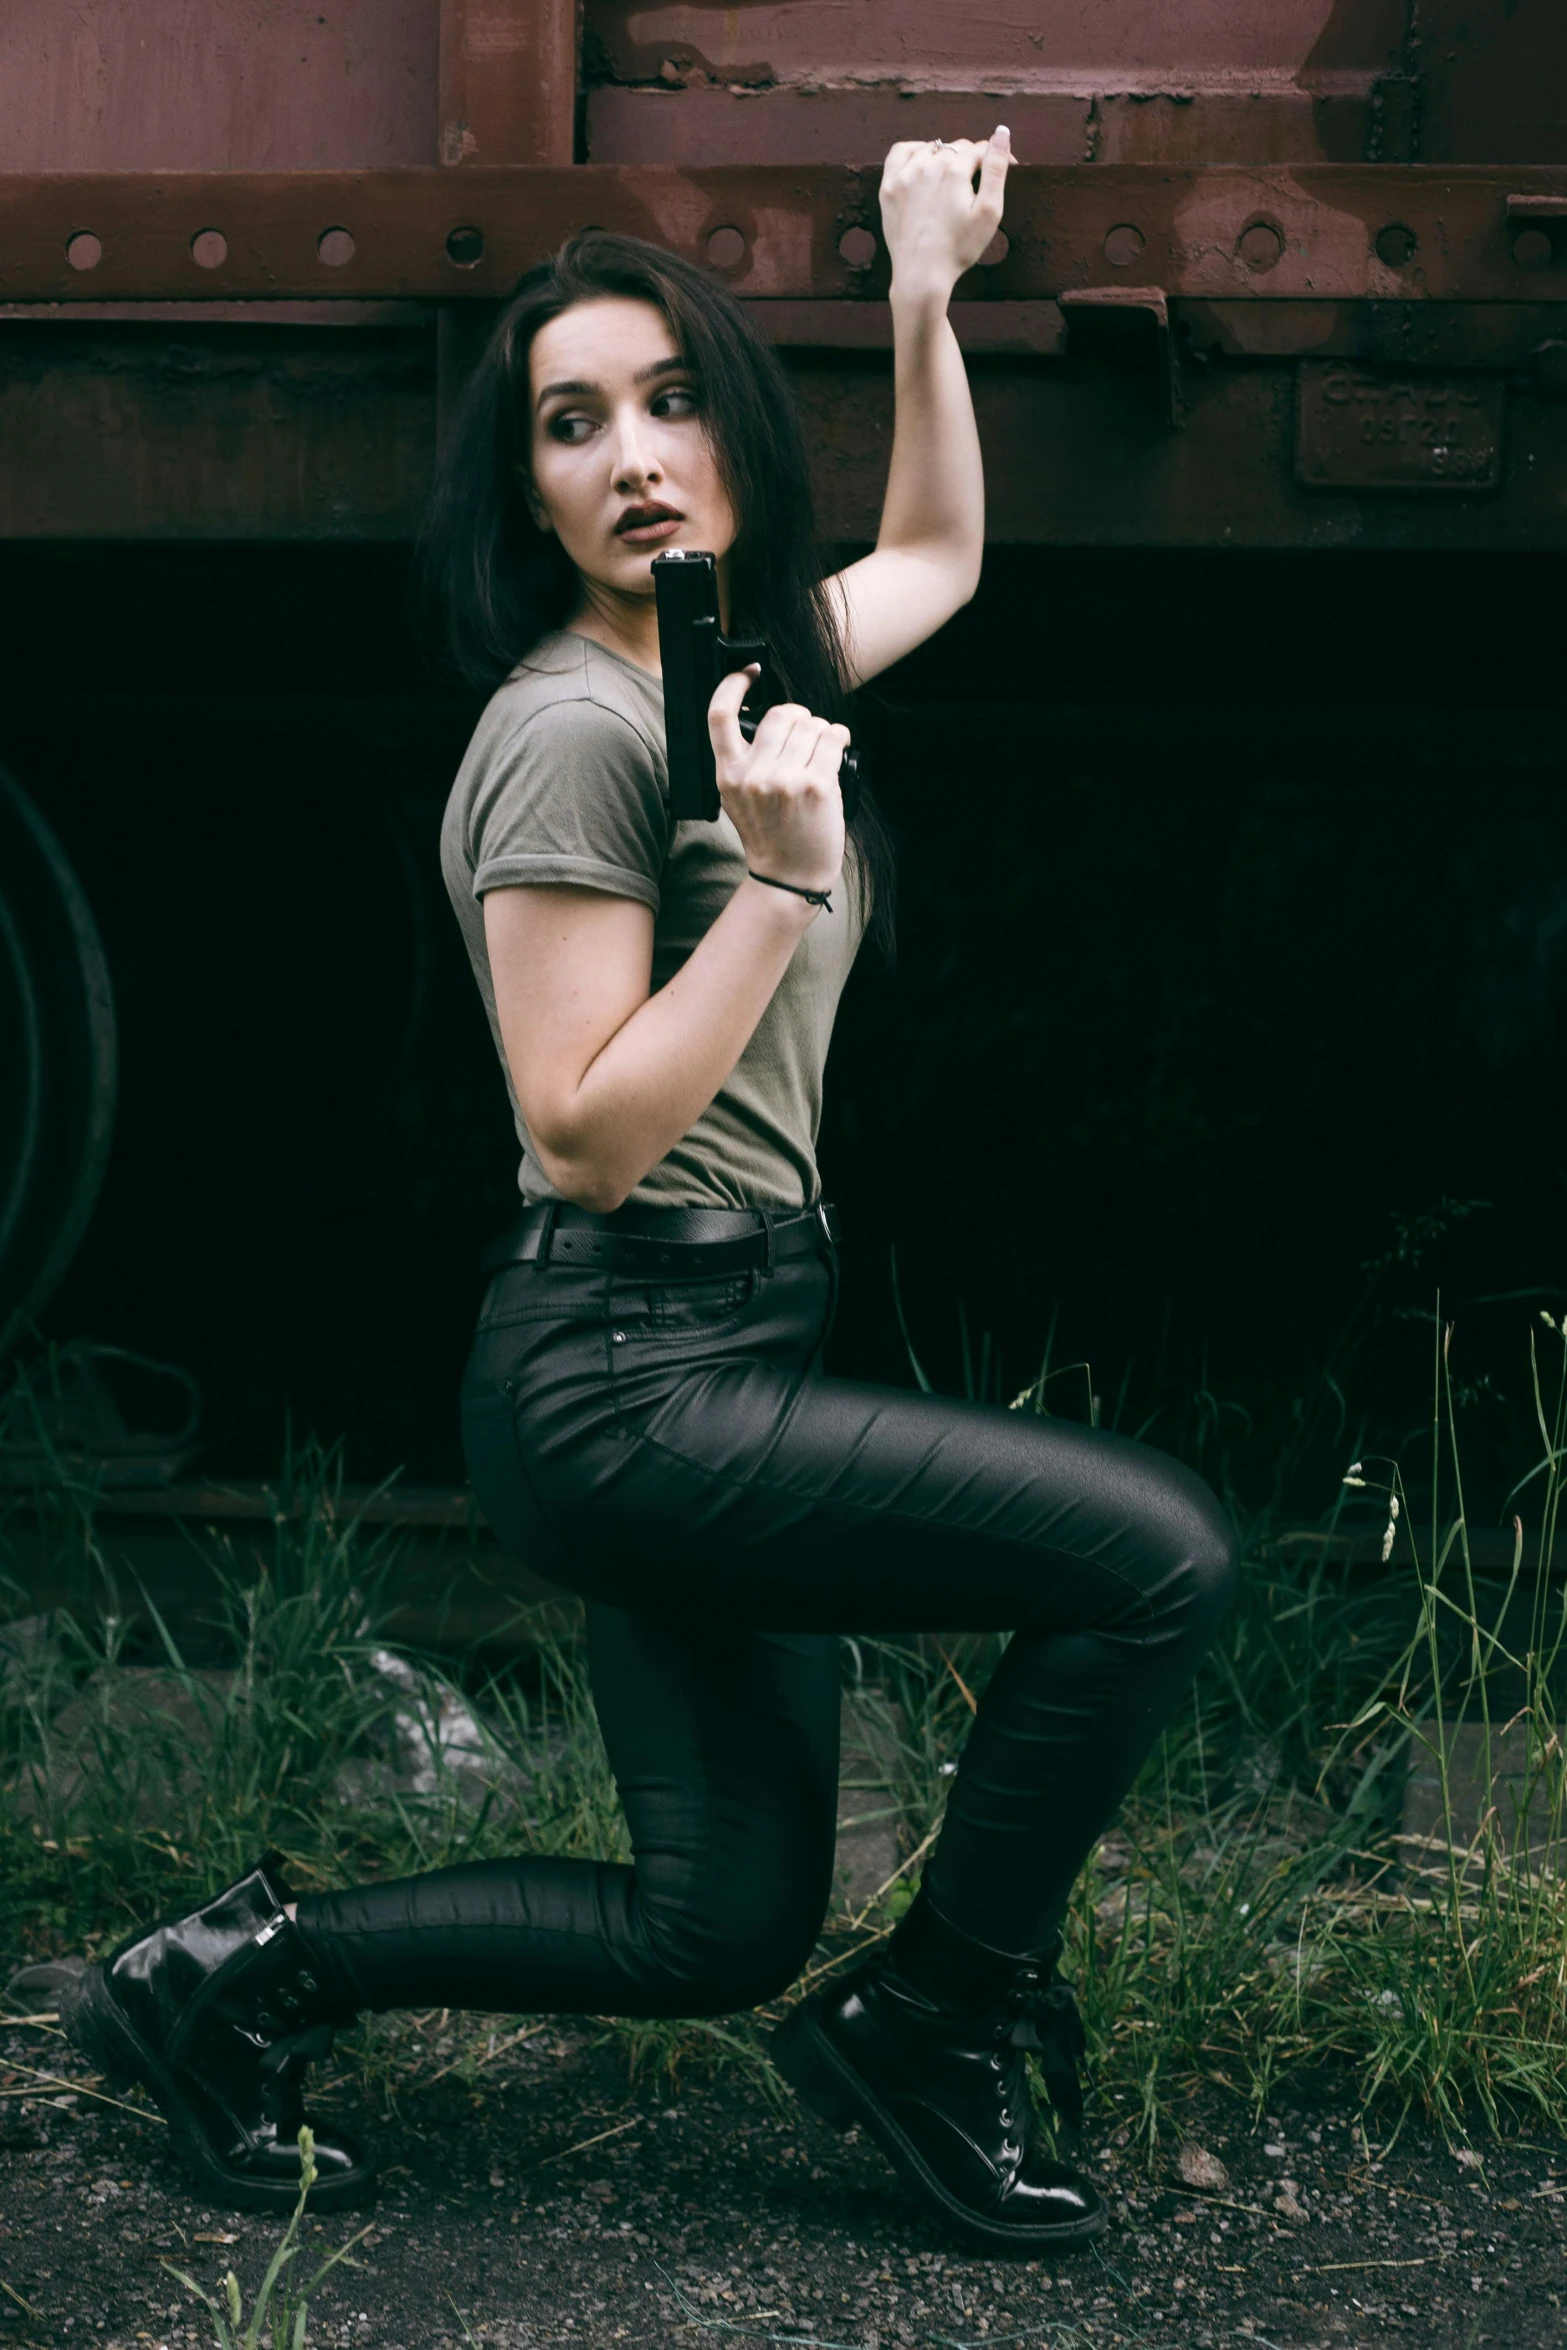 a woman is posing in front of a train, dramatic wielding gun pose, leather pants, she has black hair, promotional image